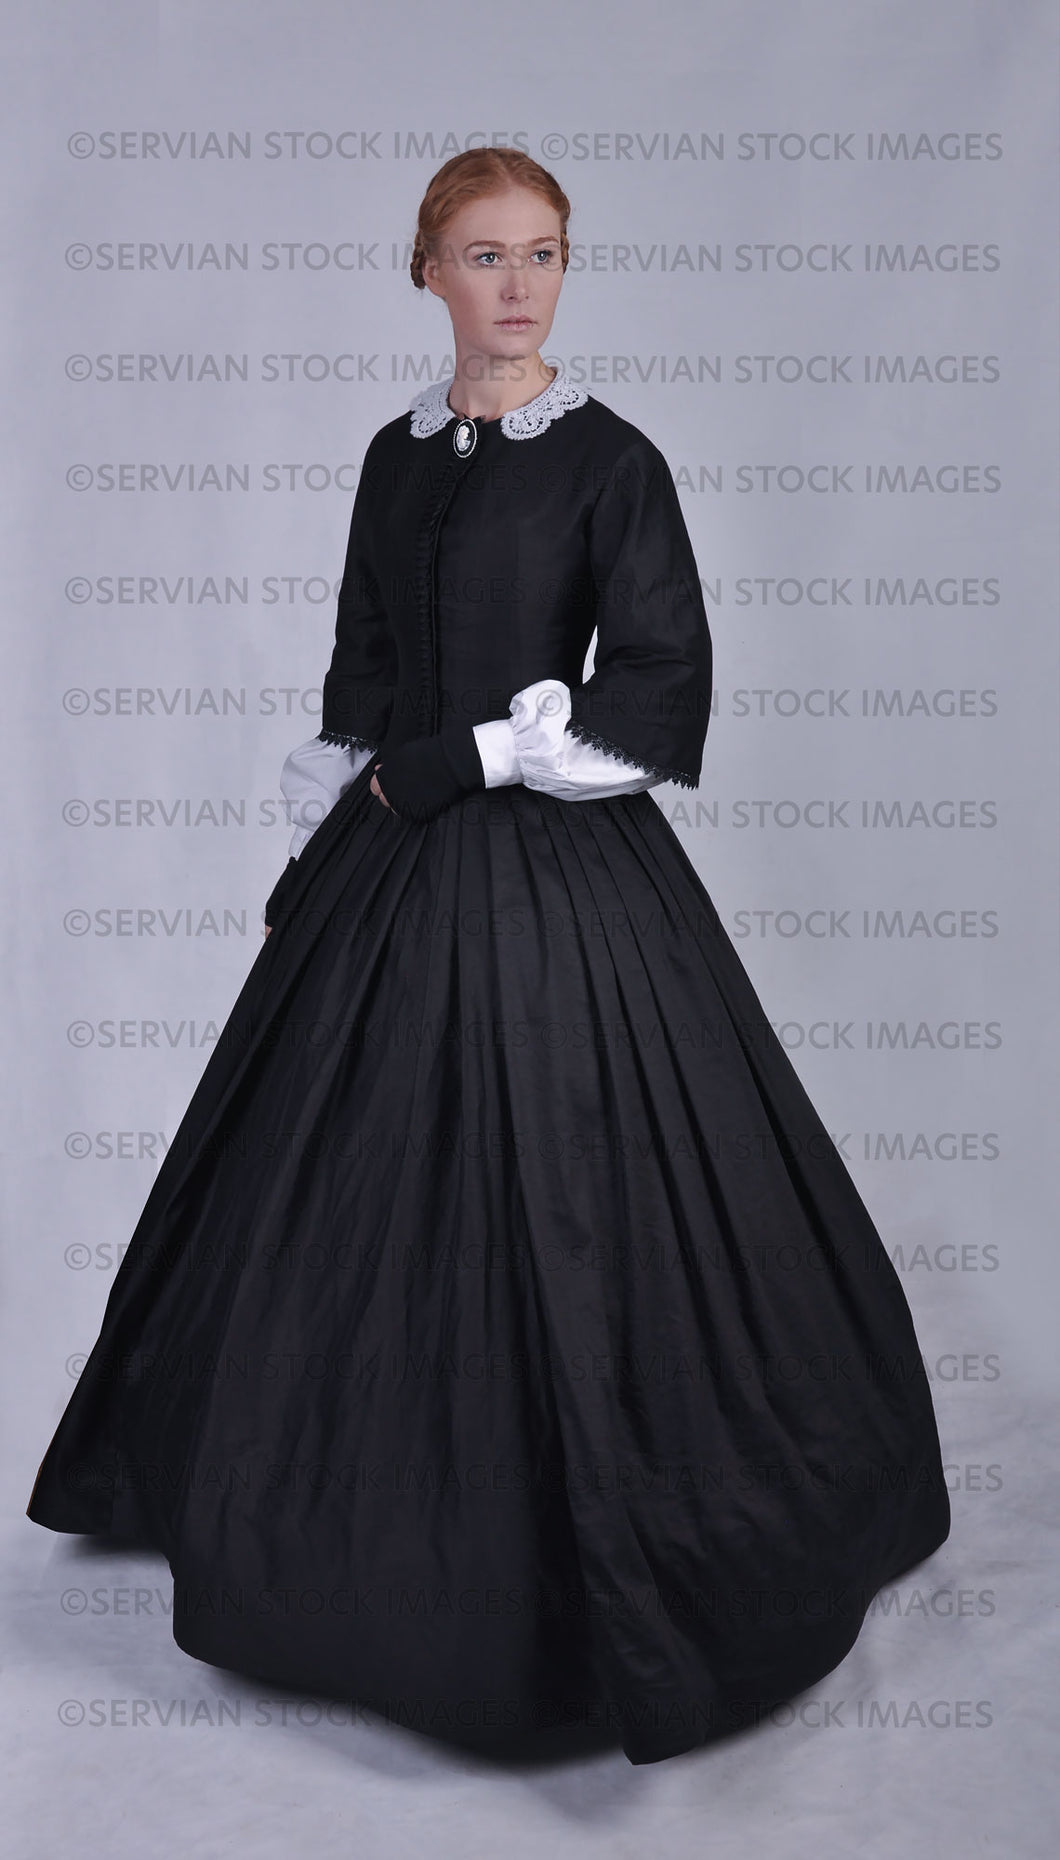 Victorian woman in a black ensemble with a lace collar  (Lauren 0753)